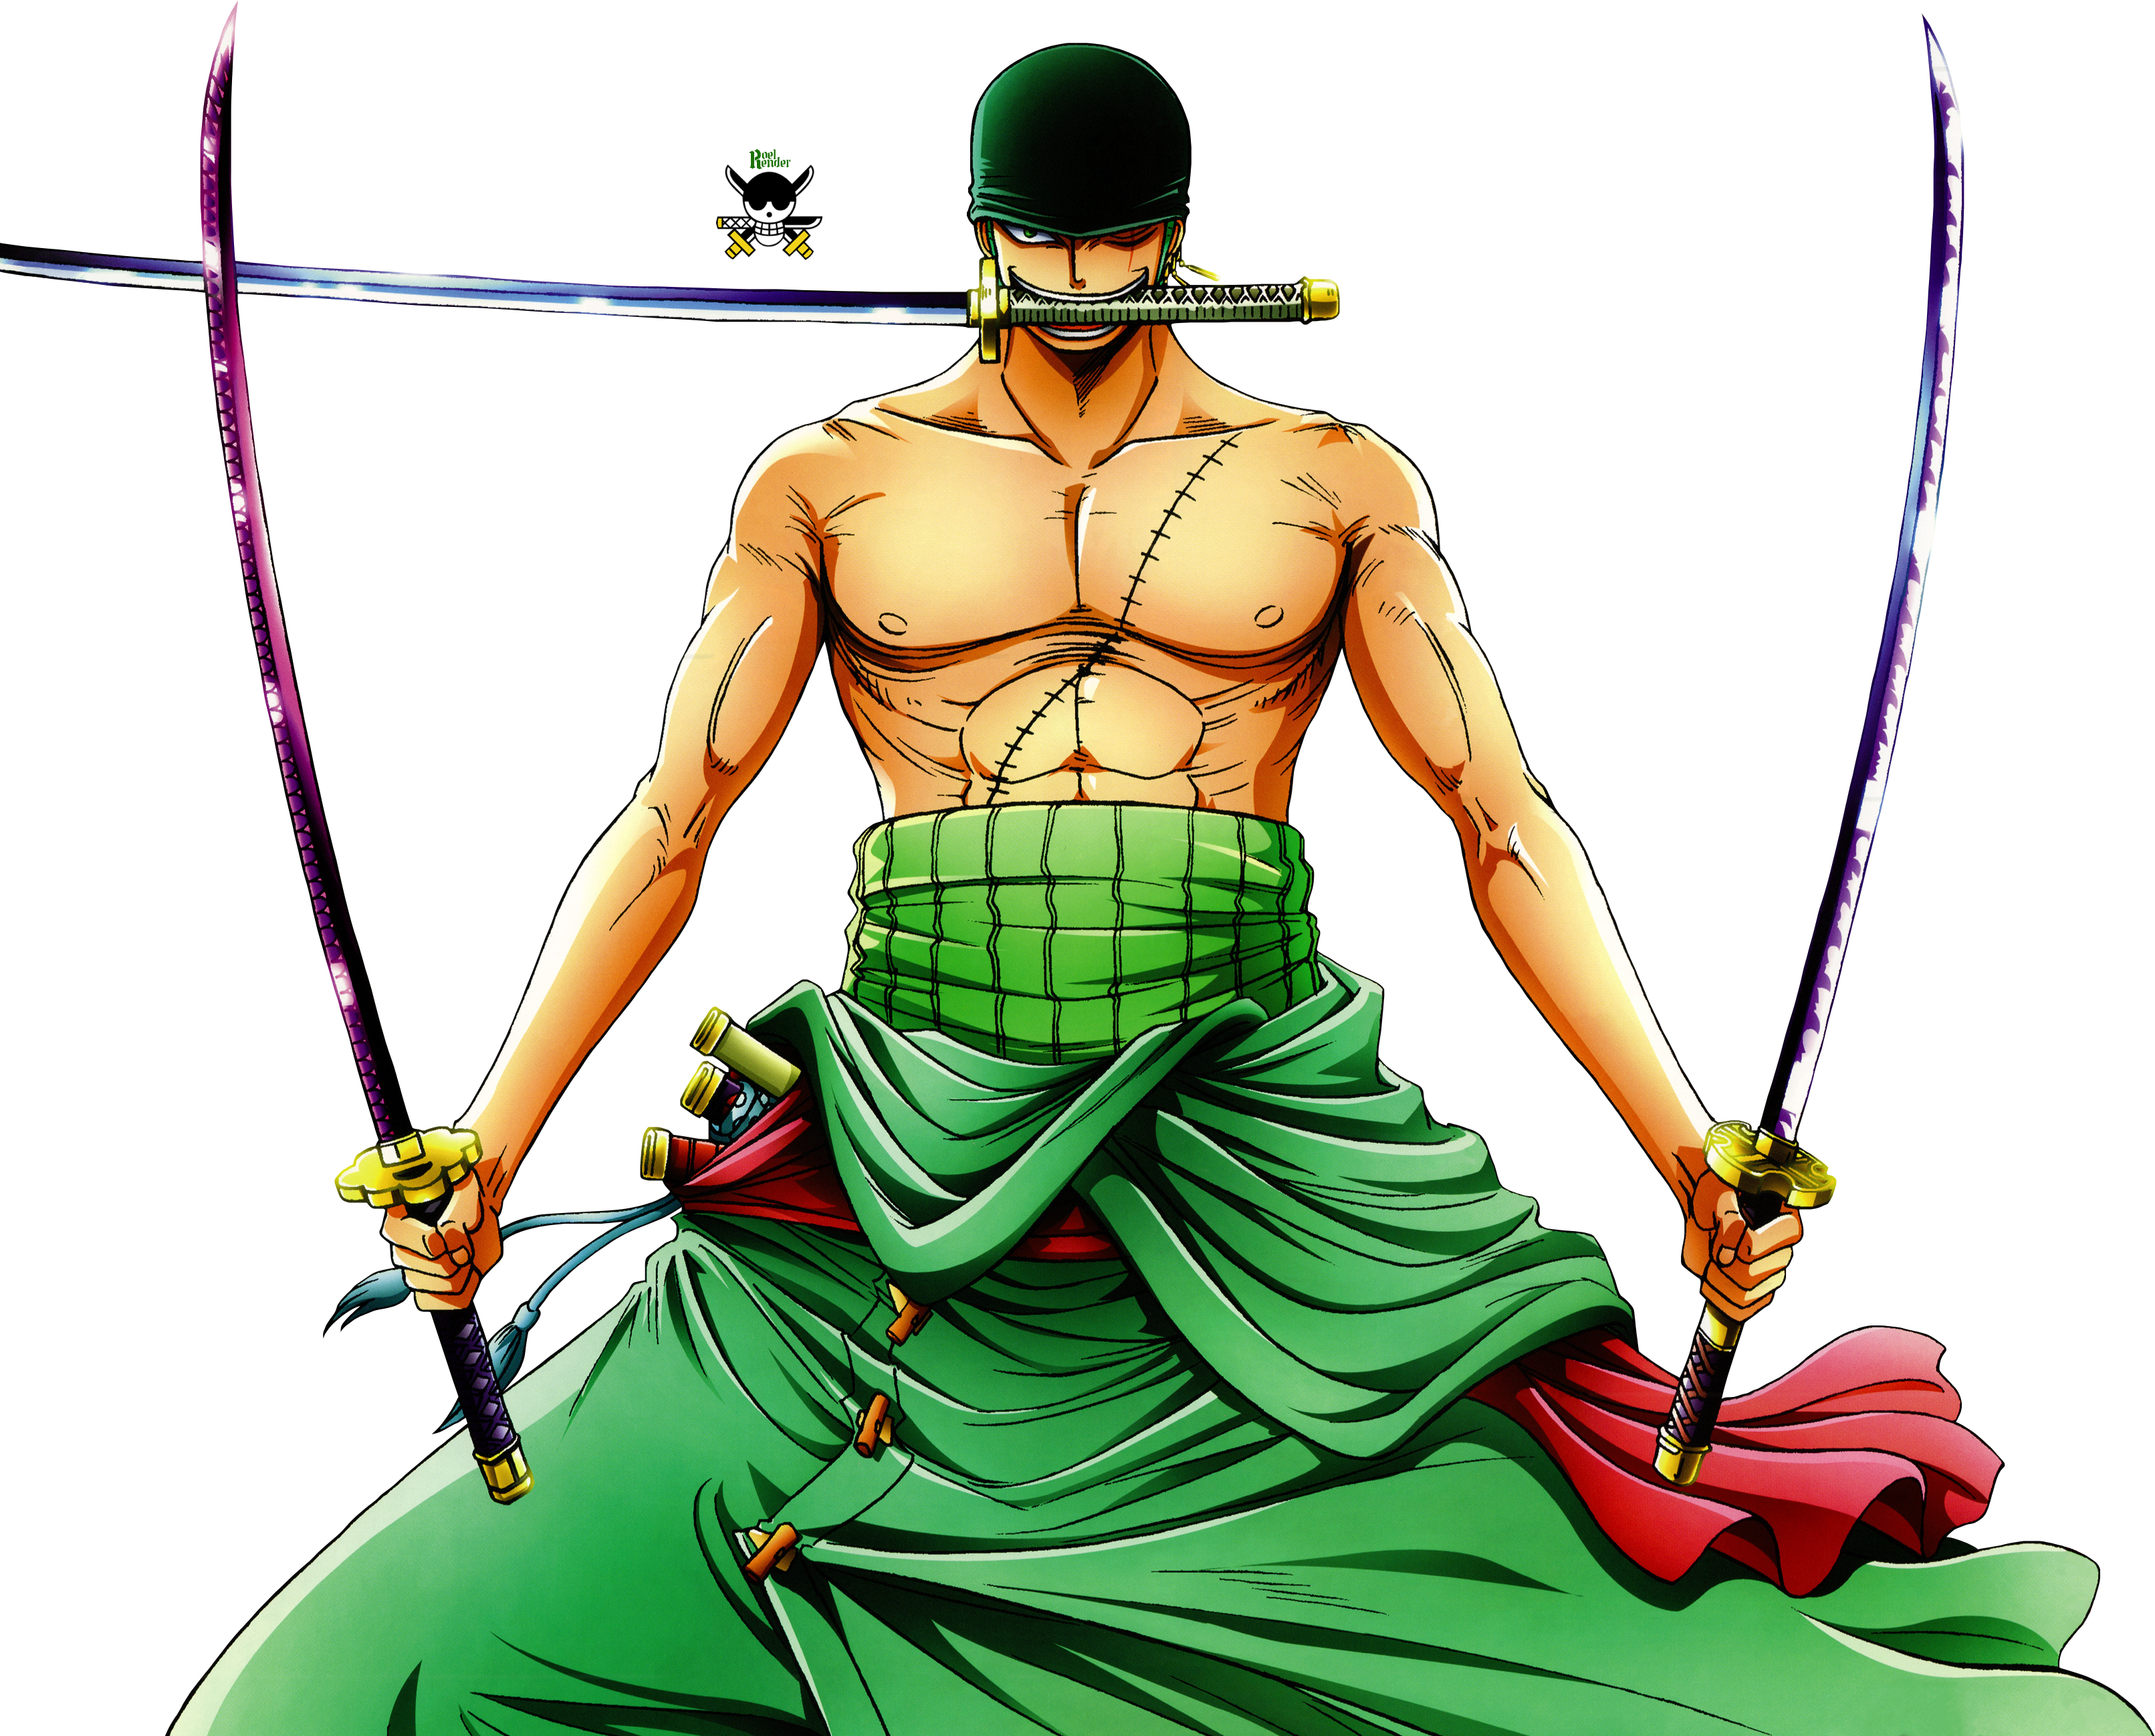 Zoro Wallpaper 4K 1920X1080, Roronoa Zoro Wallpaper for Android / Here are only the best mkbhd 4k wallpaper